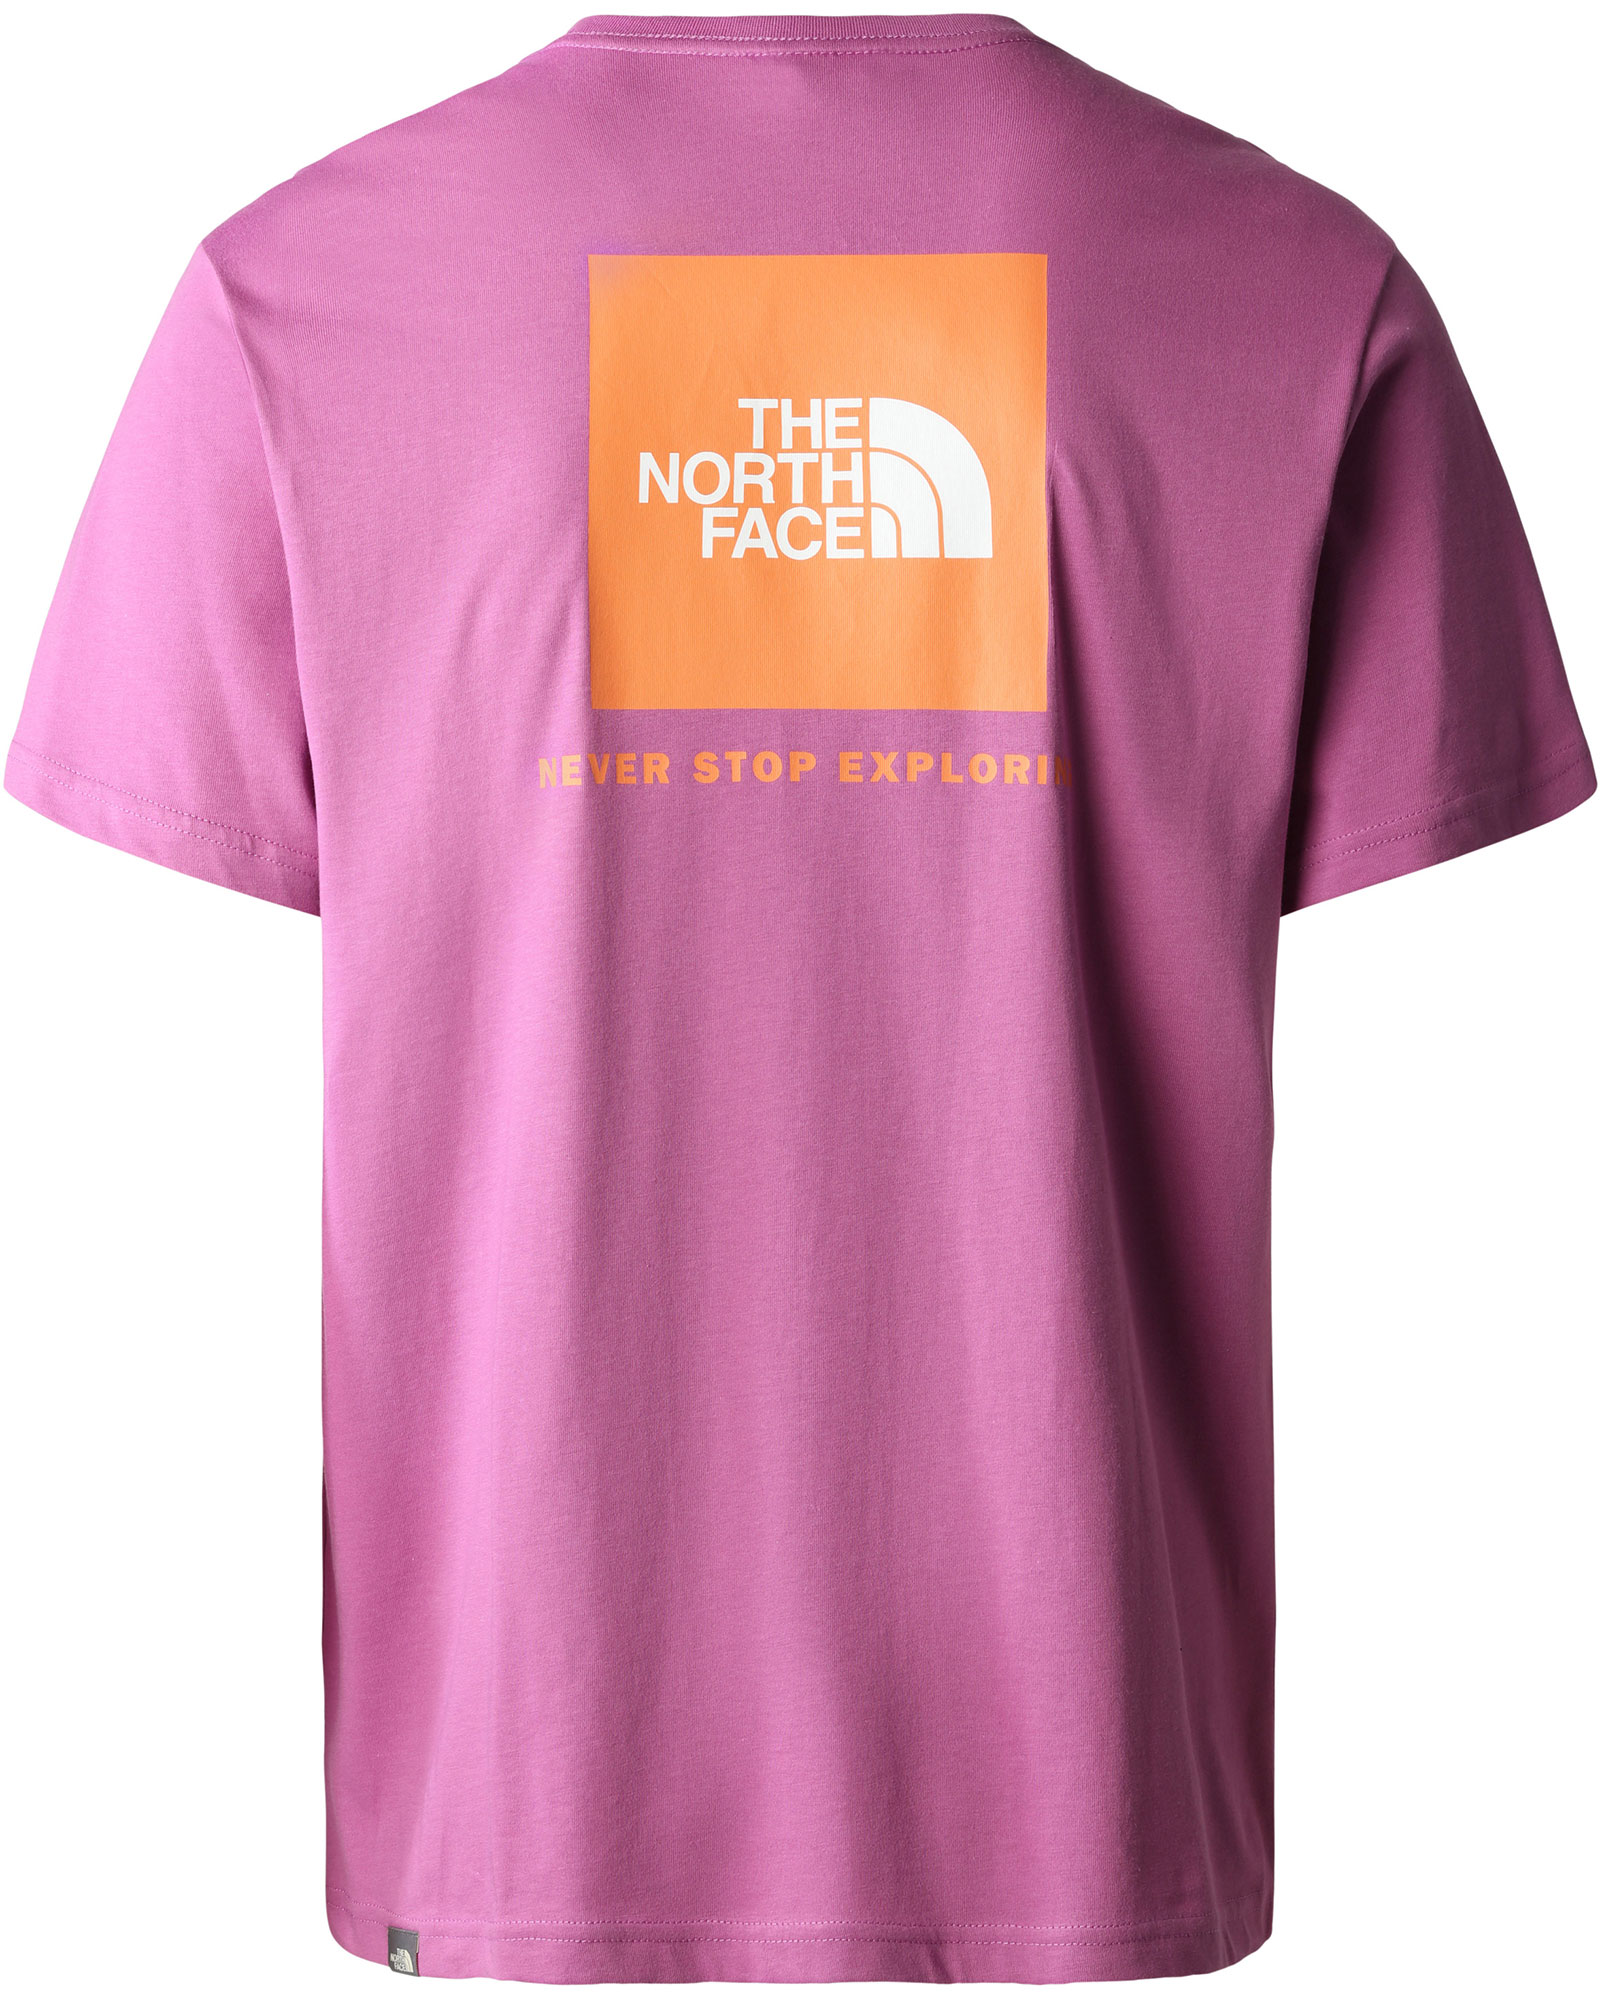 The North Face Red Box Men’s T Shirt - Purple Cactus Flower S